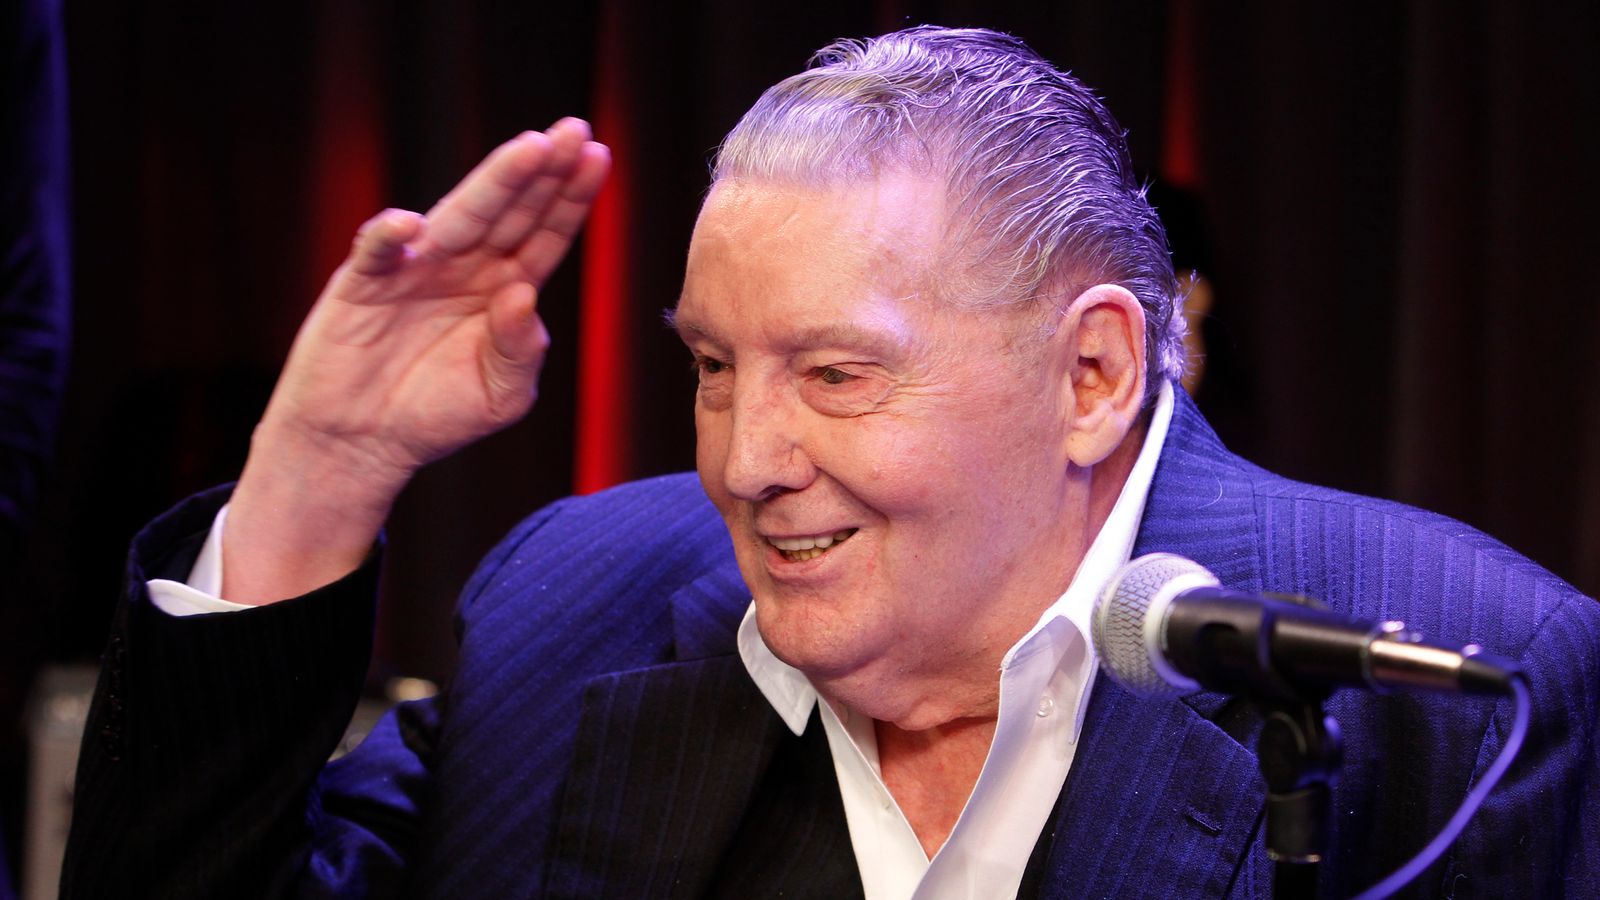 Jerry Lee Lewis: Rock n’ roll star and Great Balls of Fire singer dies aged 87